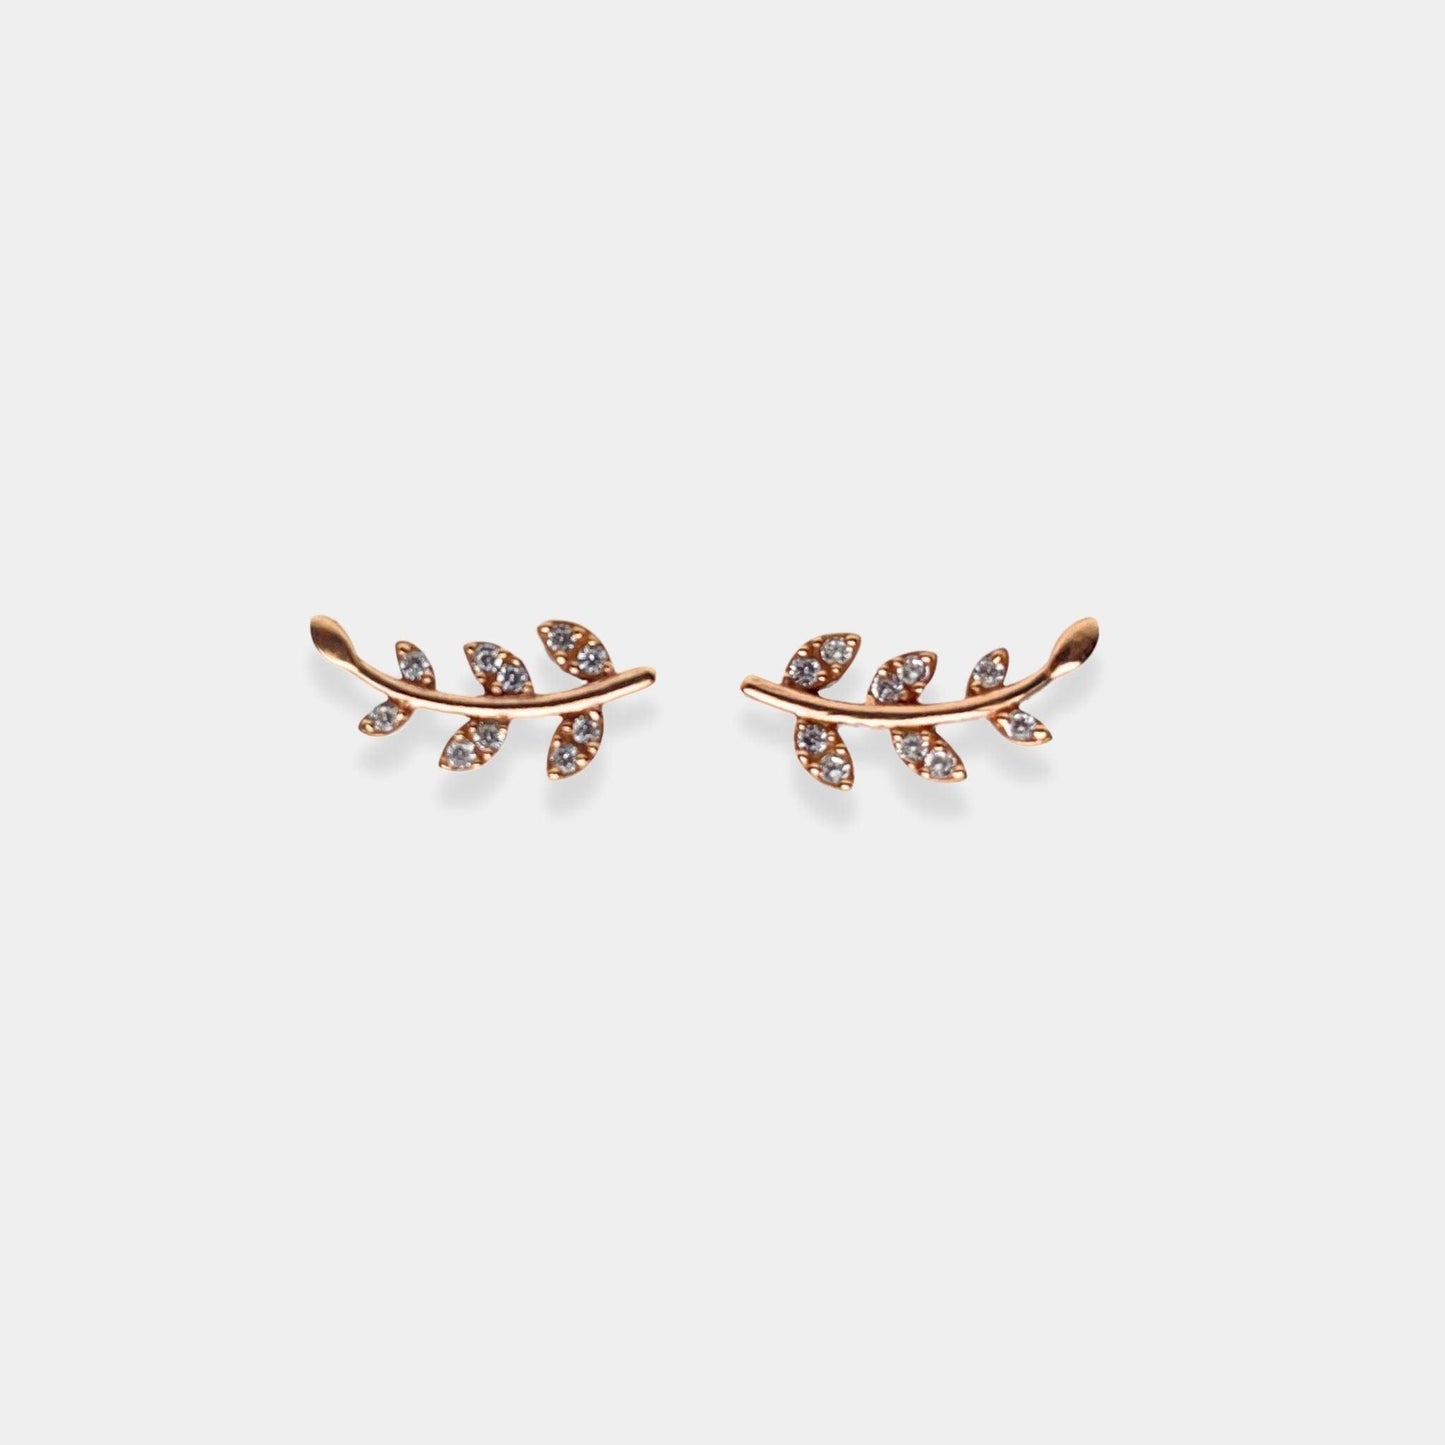 Elevate your style with NaturaLeaf's stunning and sophisticated Elegance Earrings.